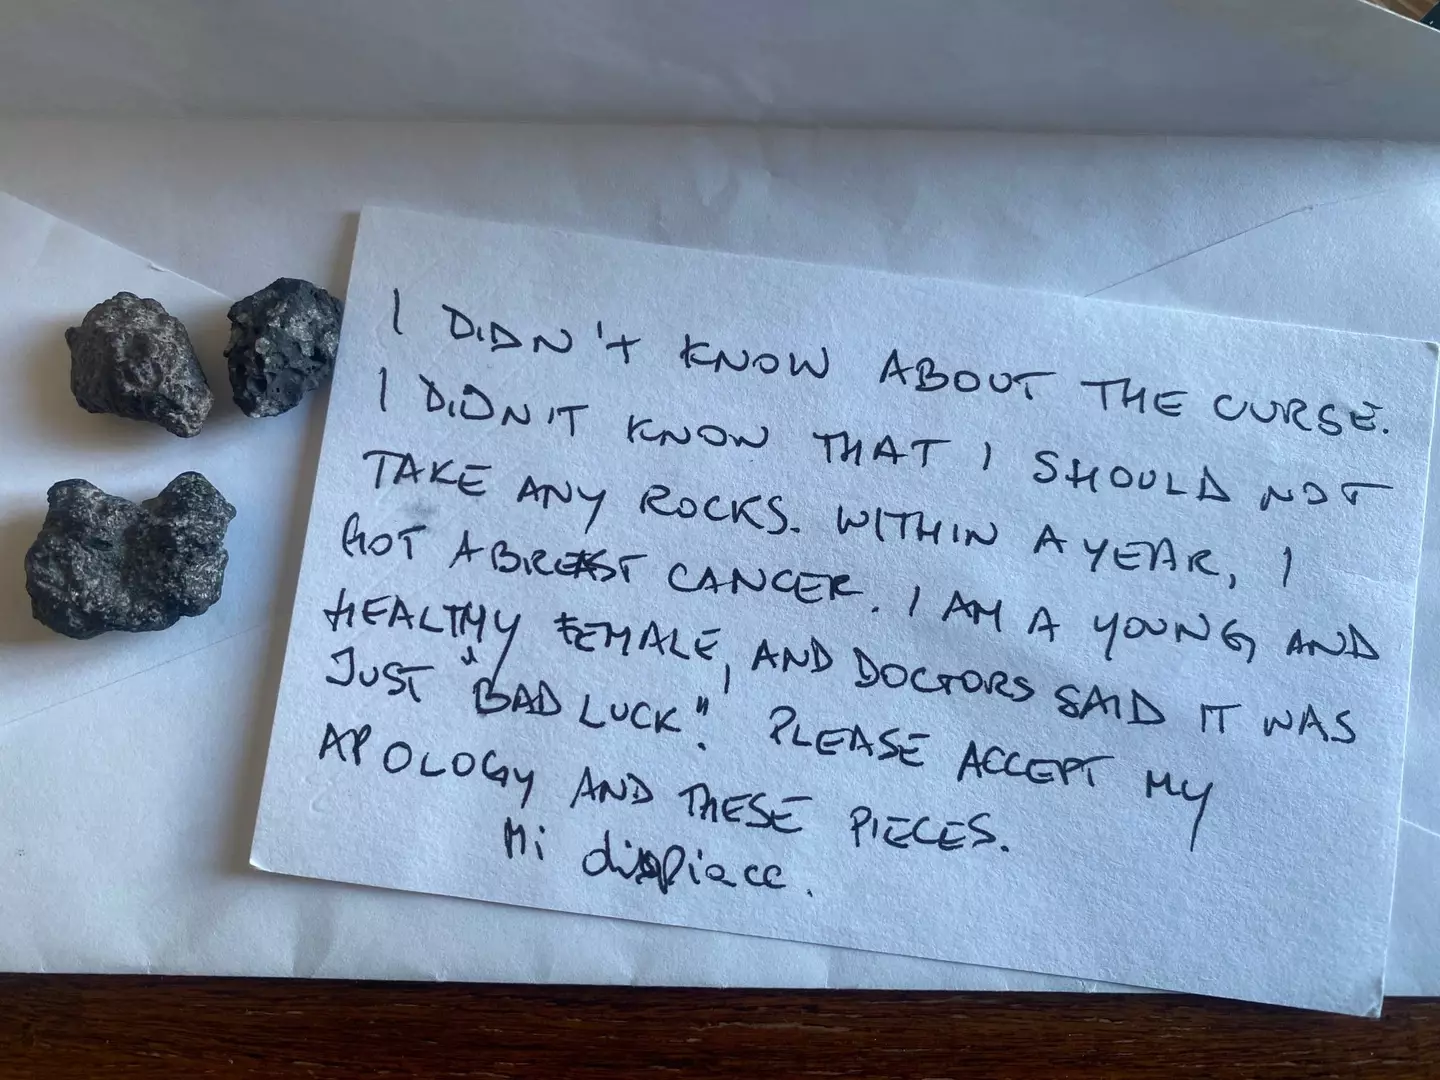 The note with the rocks.